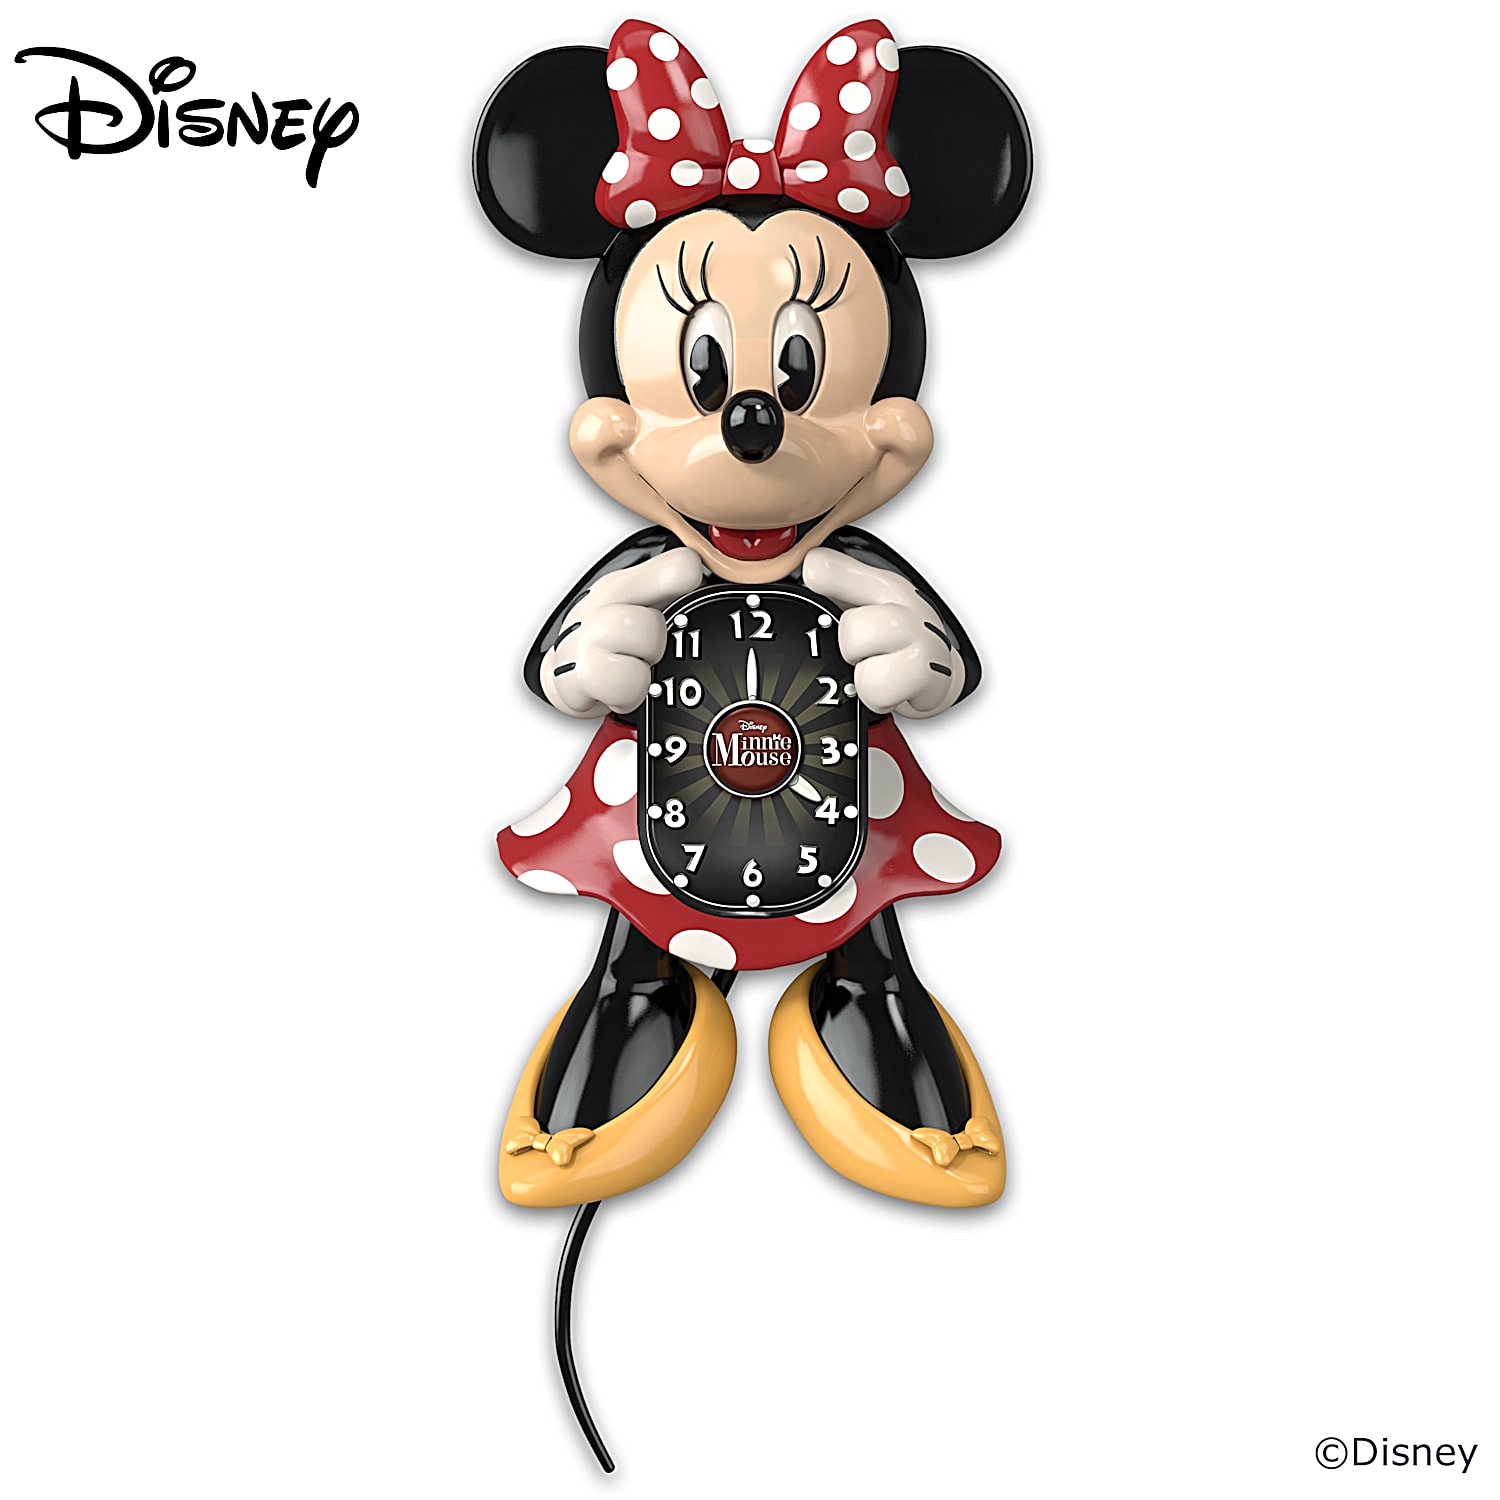 Disney Minnie Mouse Frameless Borderless Wall Clock For Gifts or